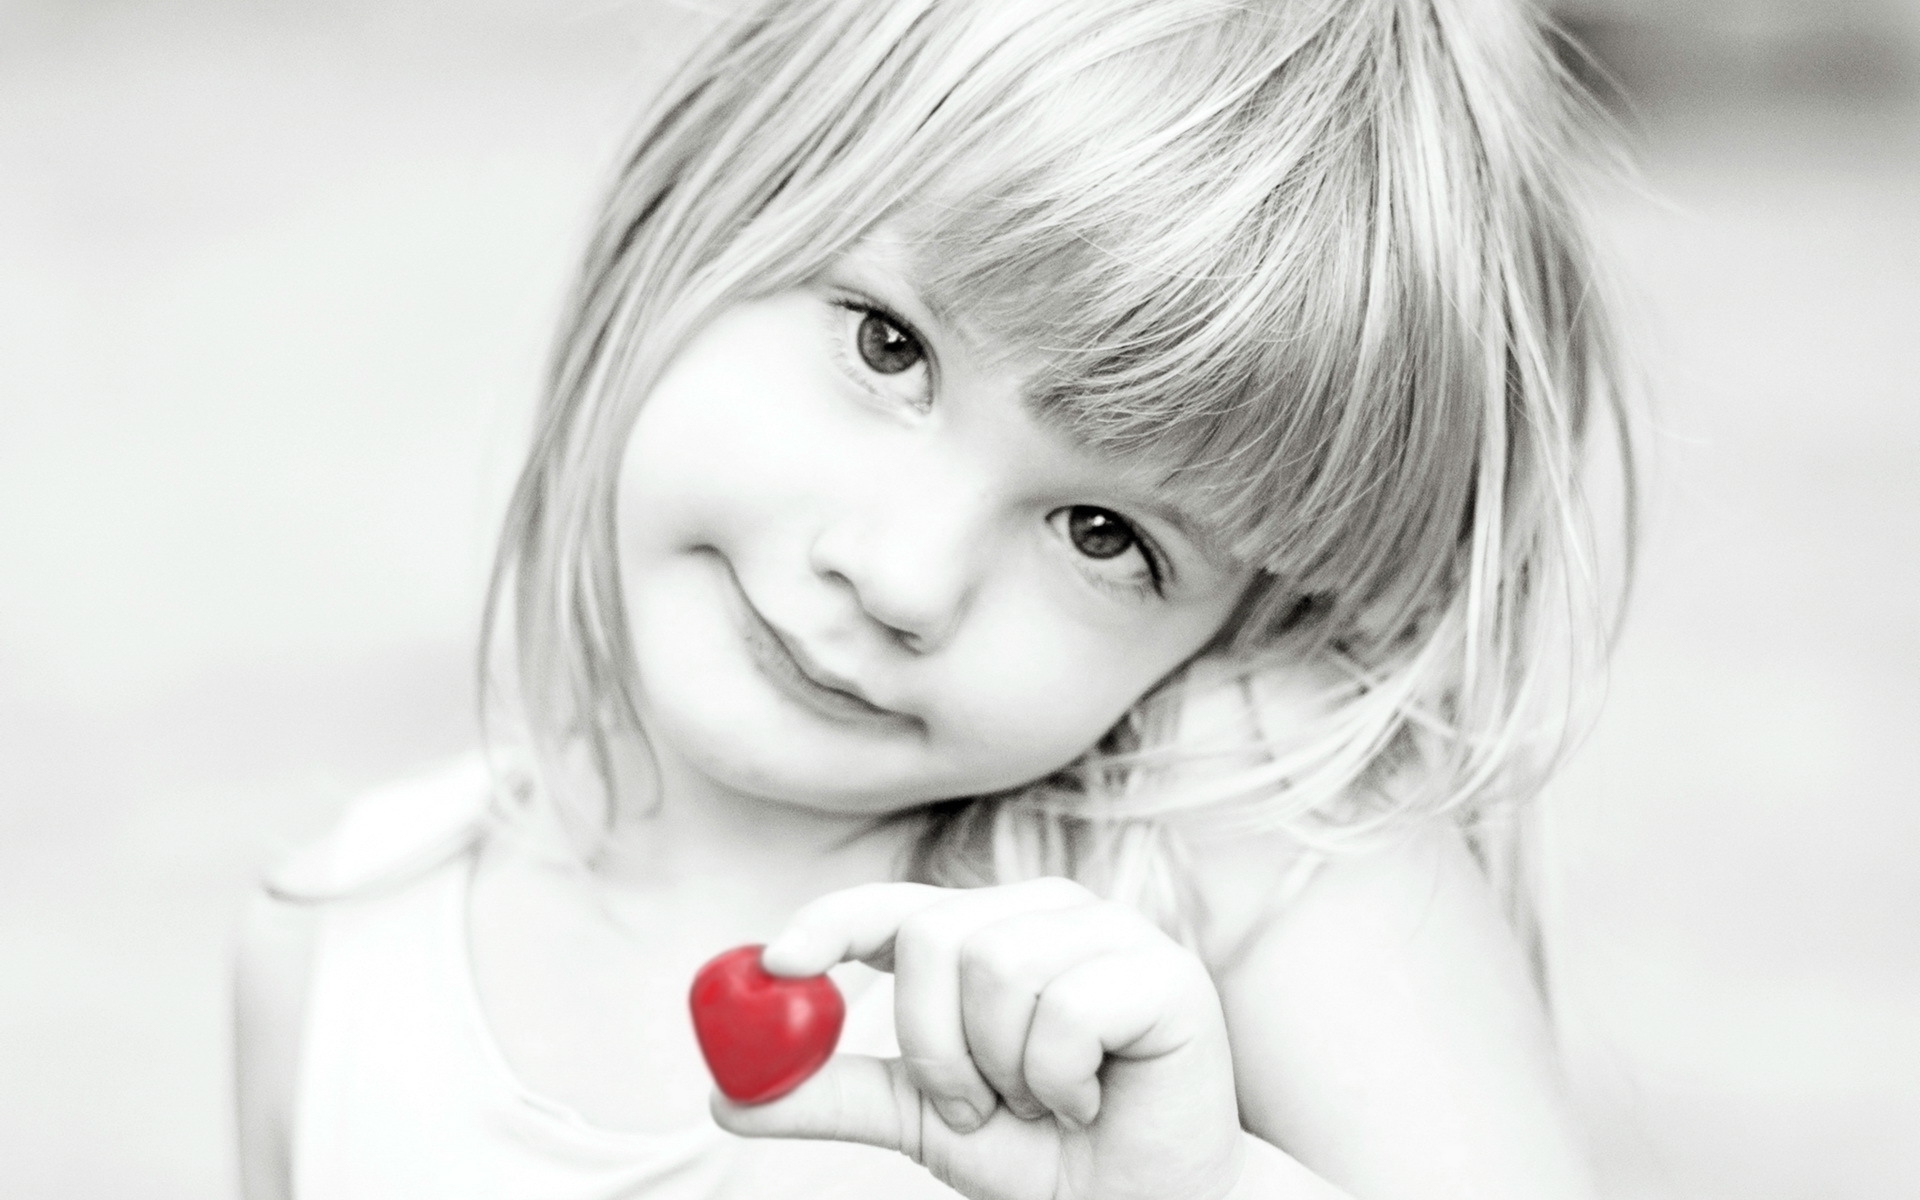 black and white love wallpaper,hair,white,child,photograph,hairstyle